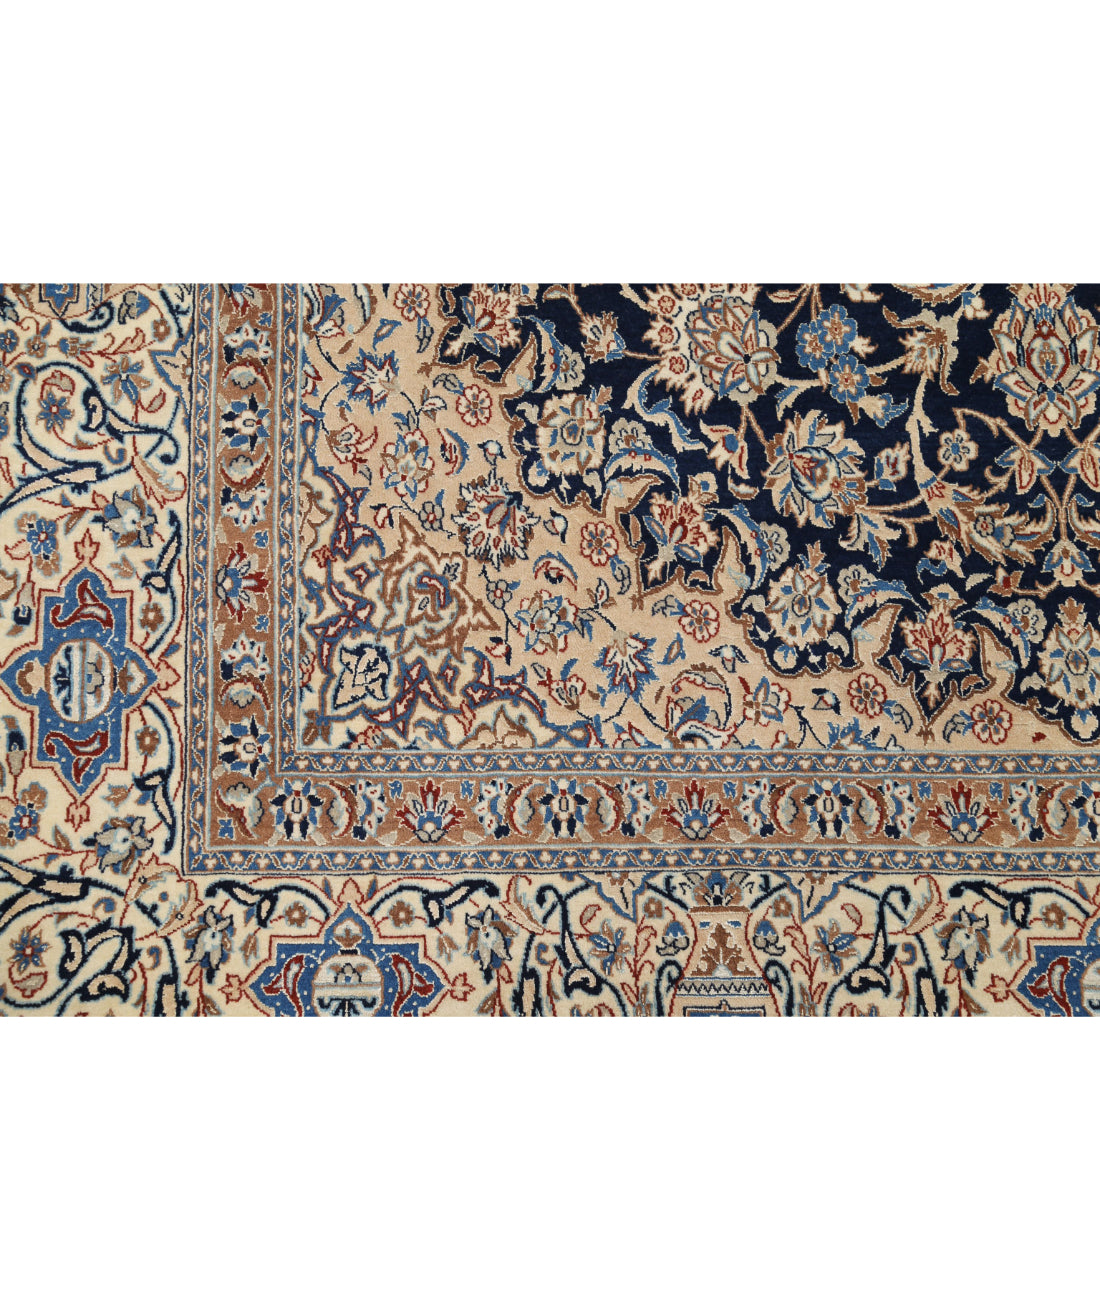 Hand Knotted Masterpiece Persian Nain Wool & Silk Rug - 5'11'' x 9'9'' 5'11'' x 9'9'' (178 X 293) / Blue / Ivory